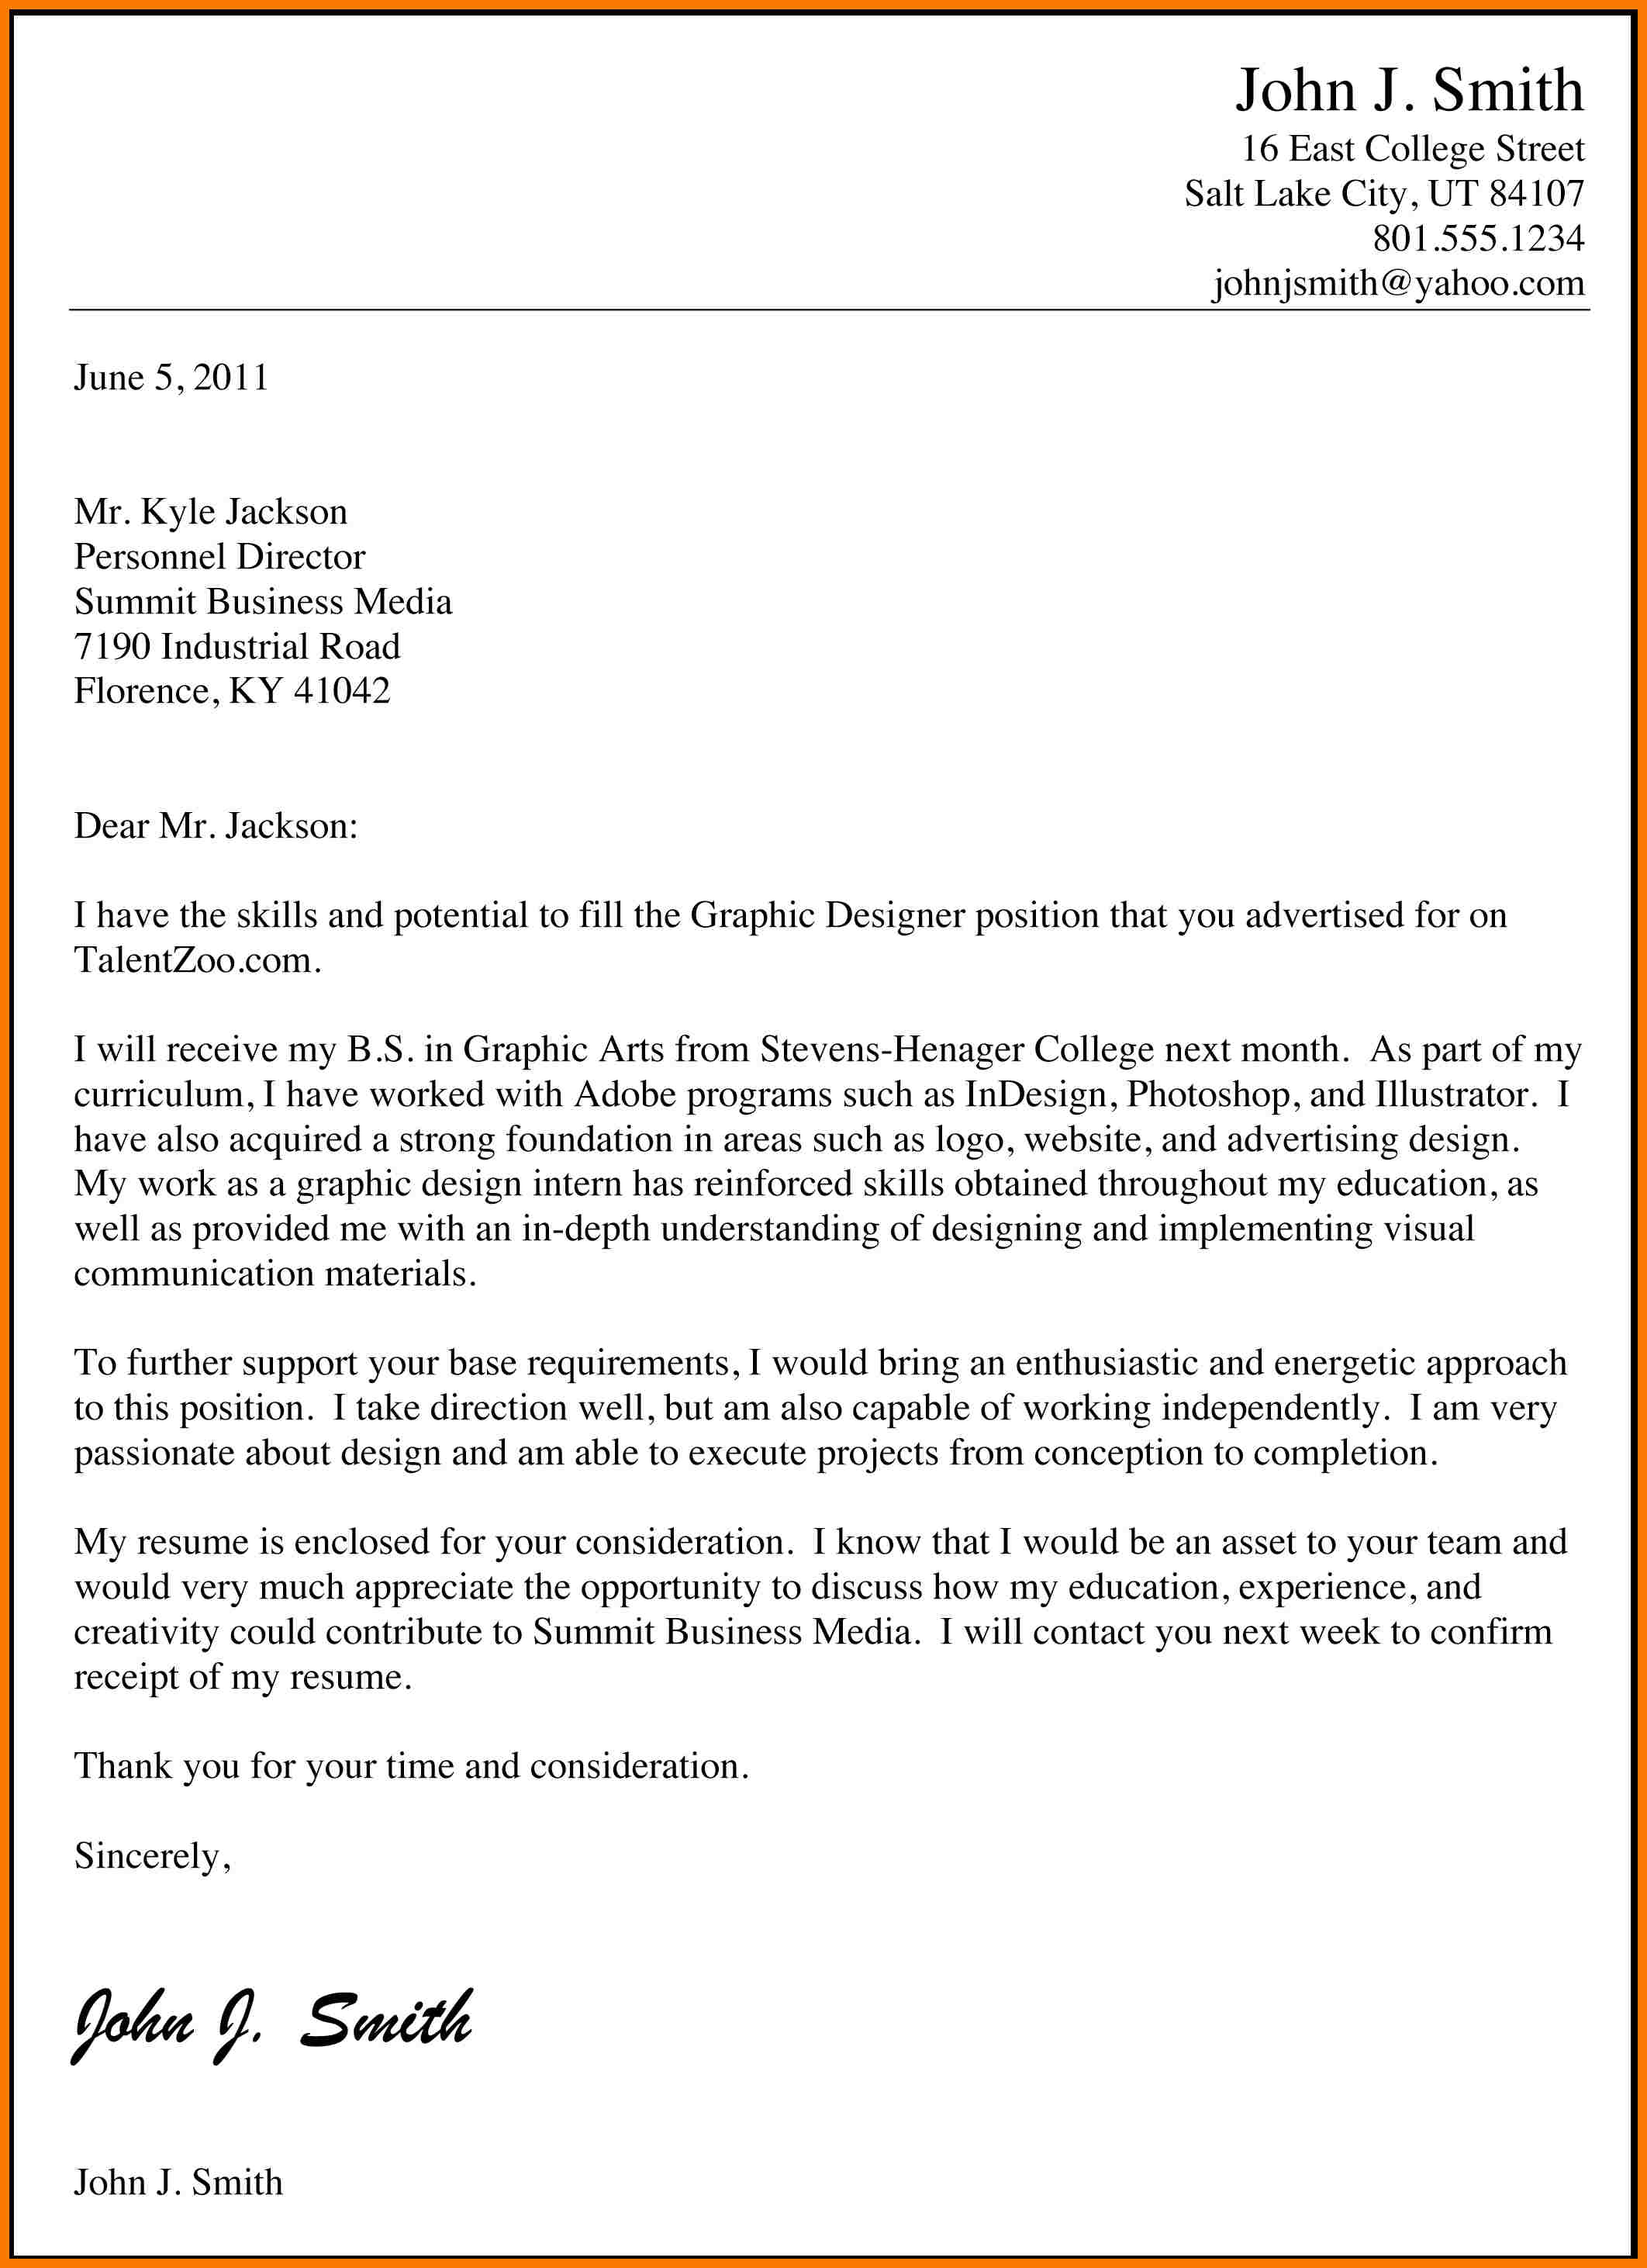 example of an application letter for a job